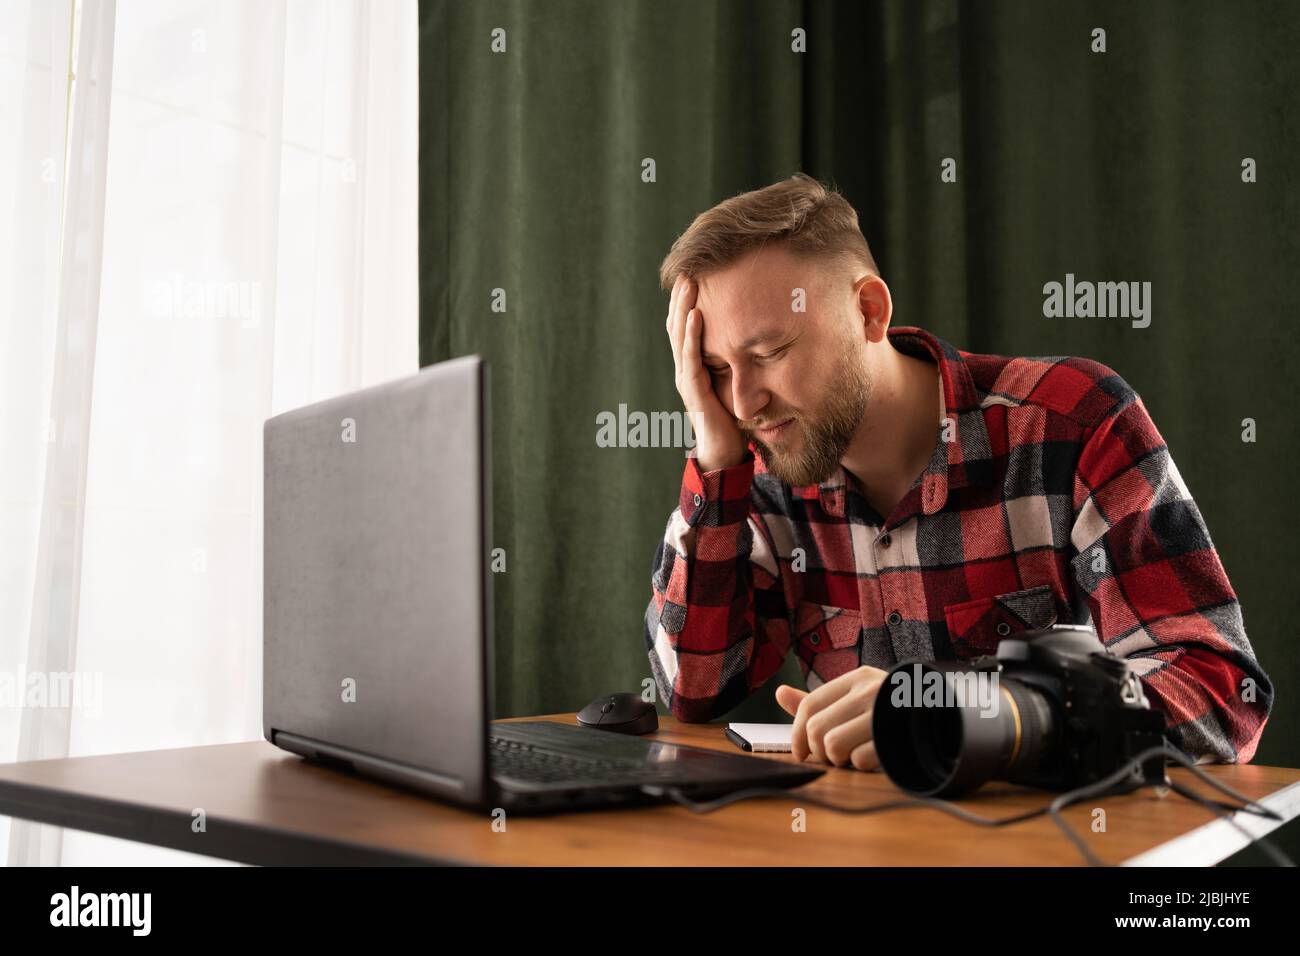 Frustrated Photographer off loading files on laptop. Checking photos working at modern office. editing his images on laptop. problem Stock Photo